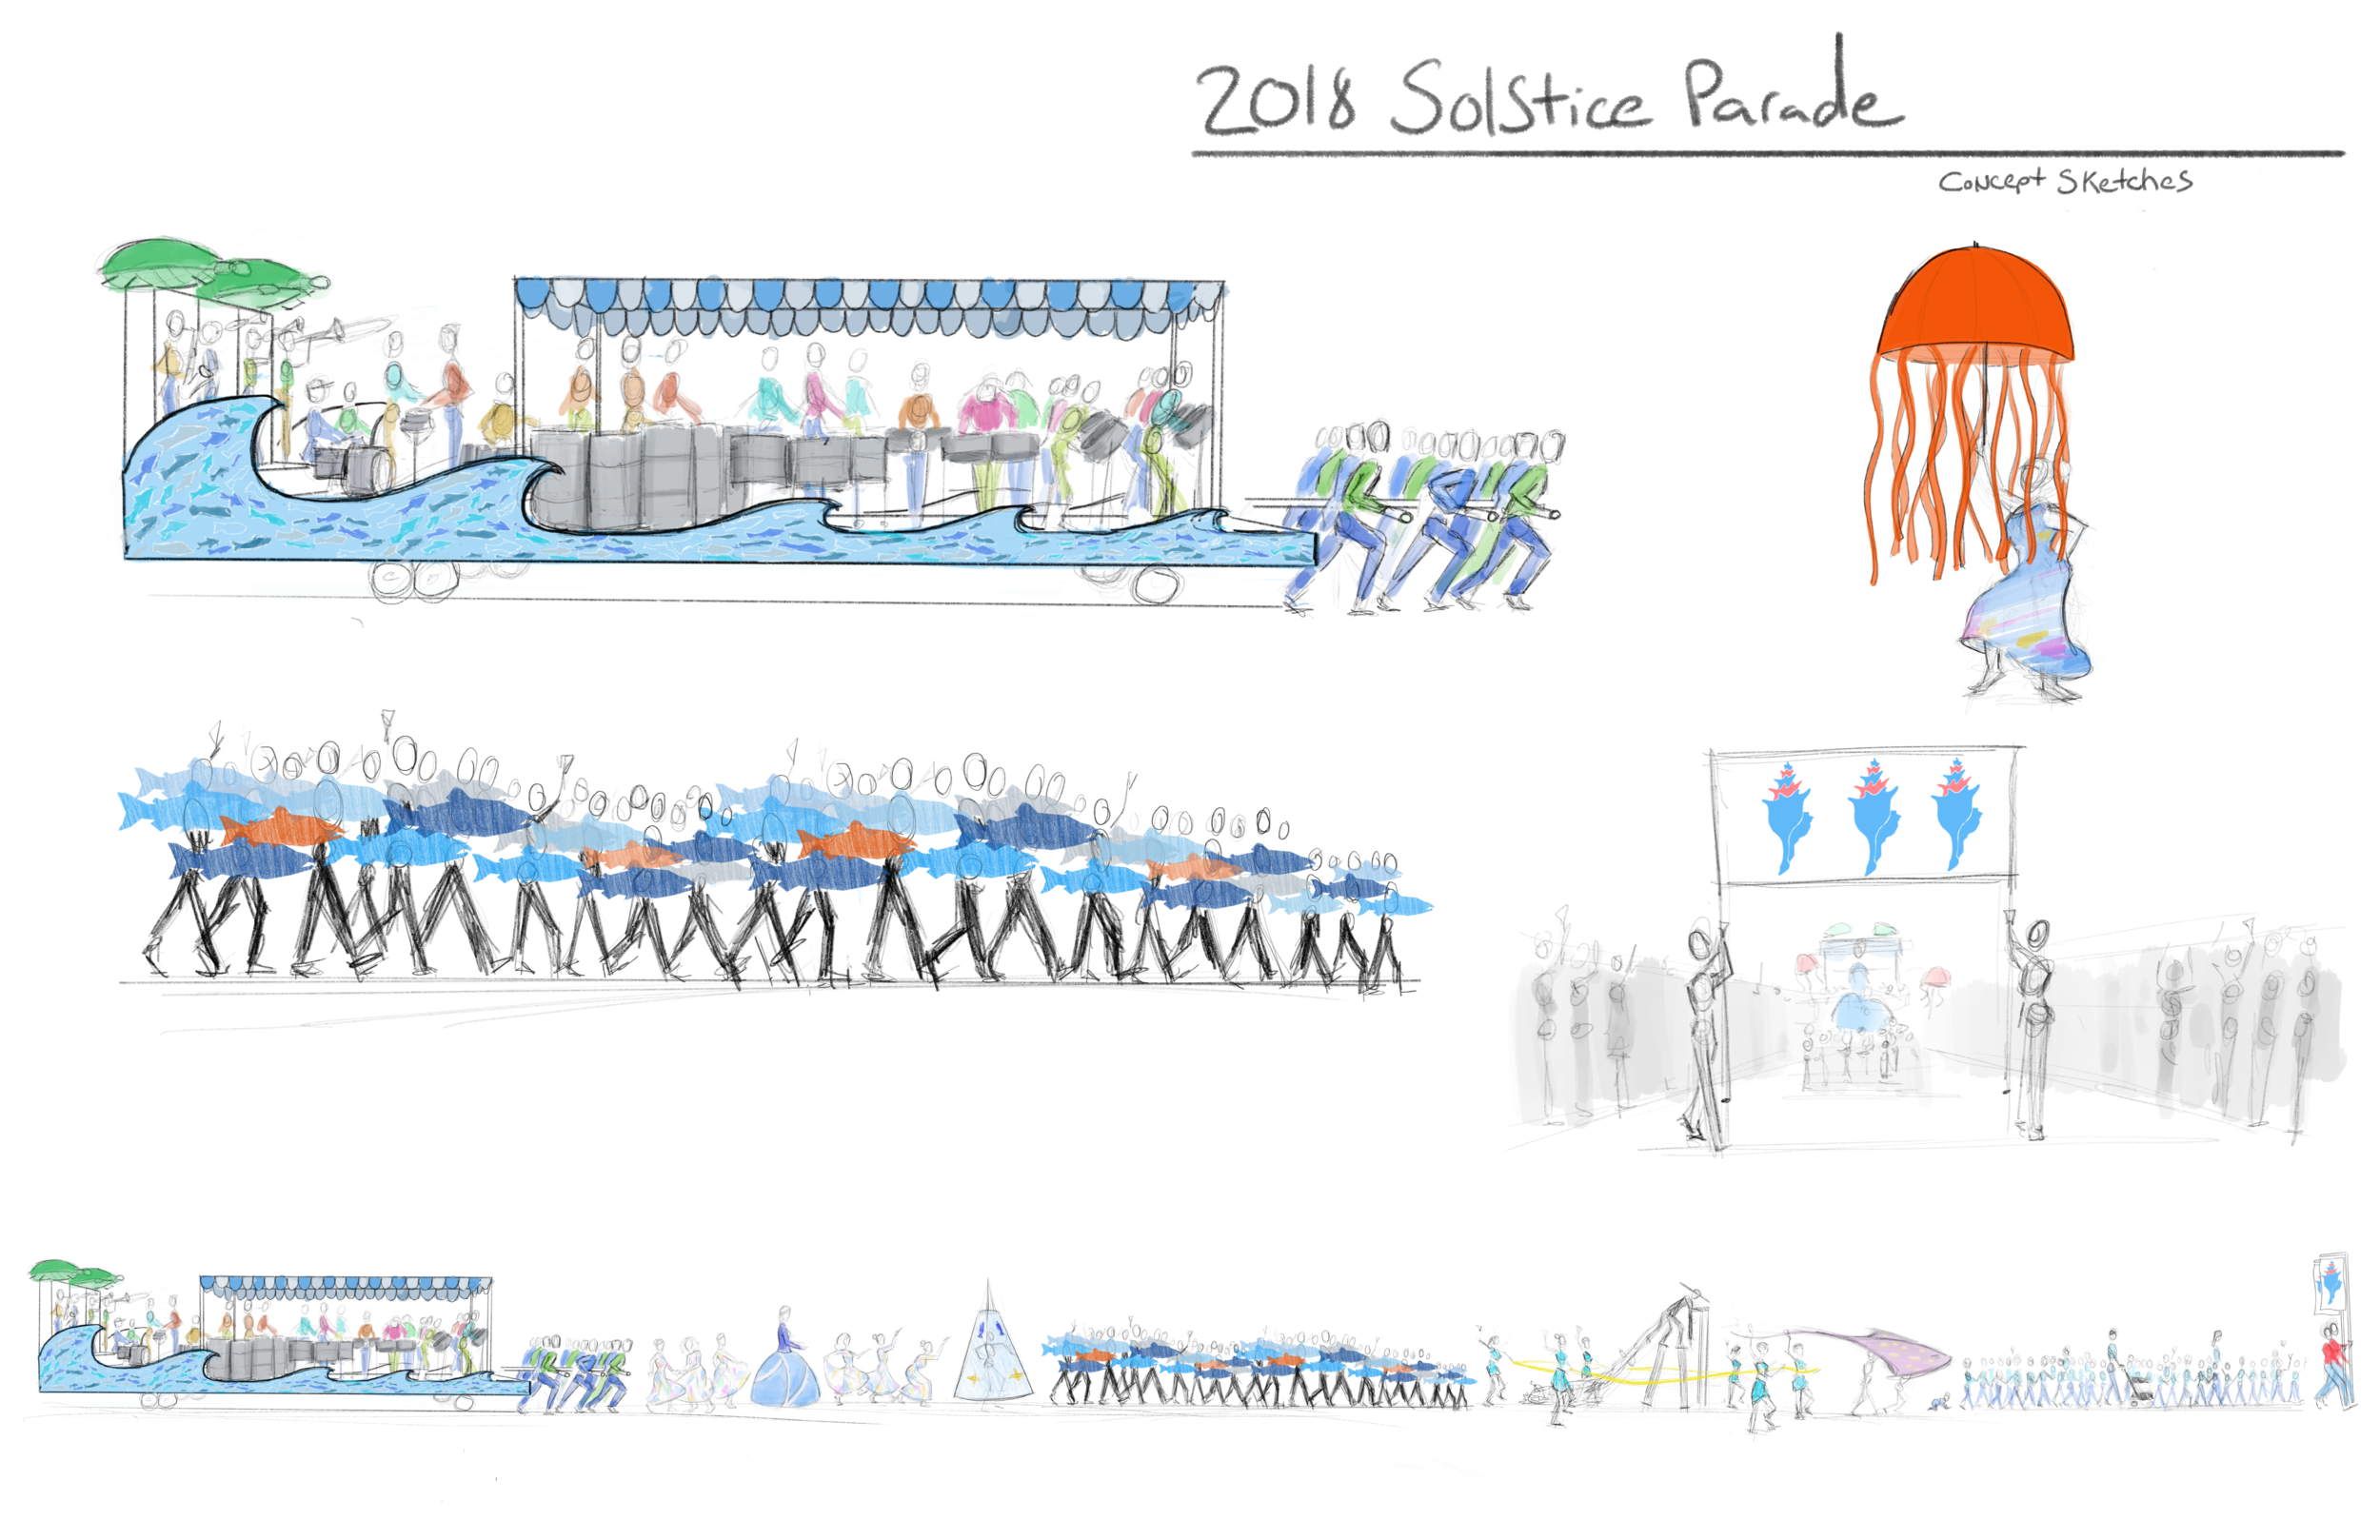 2018solstice parade sketches 2.png